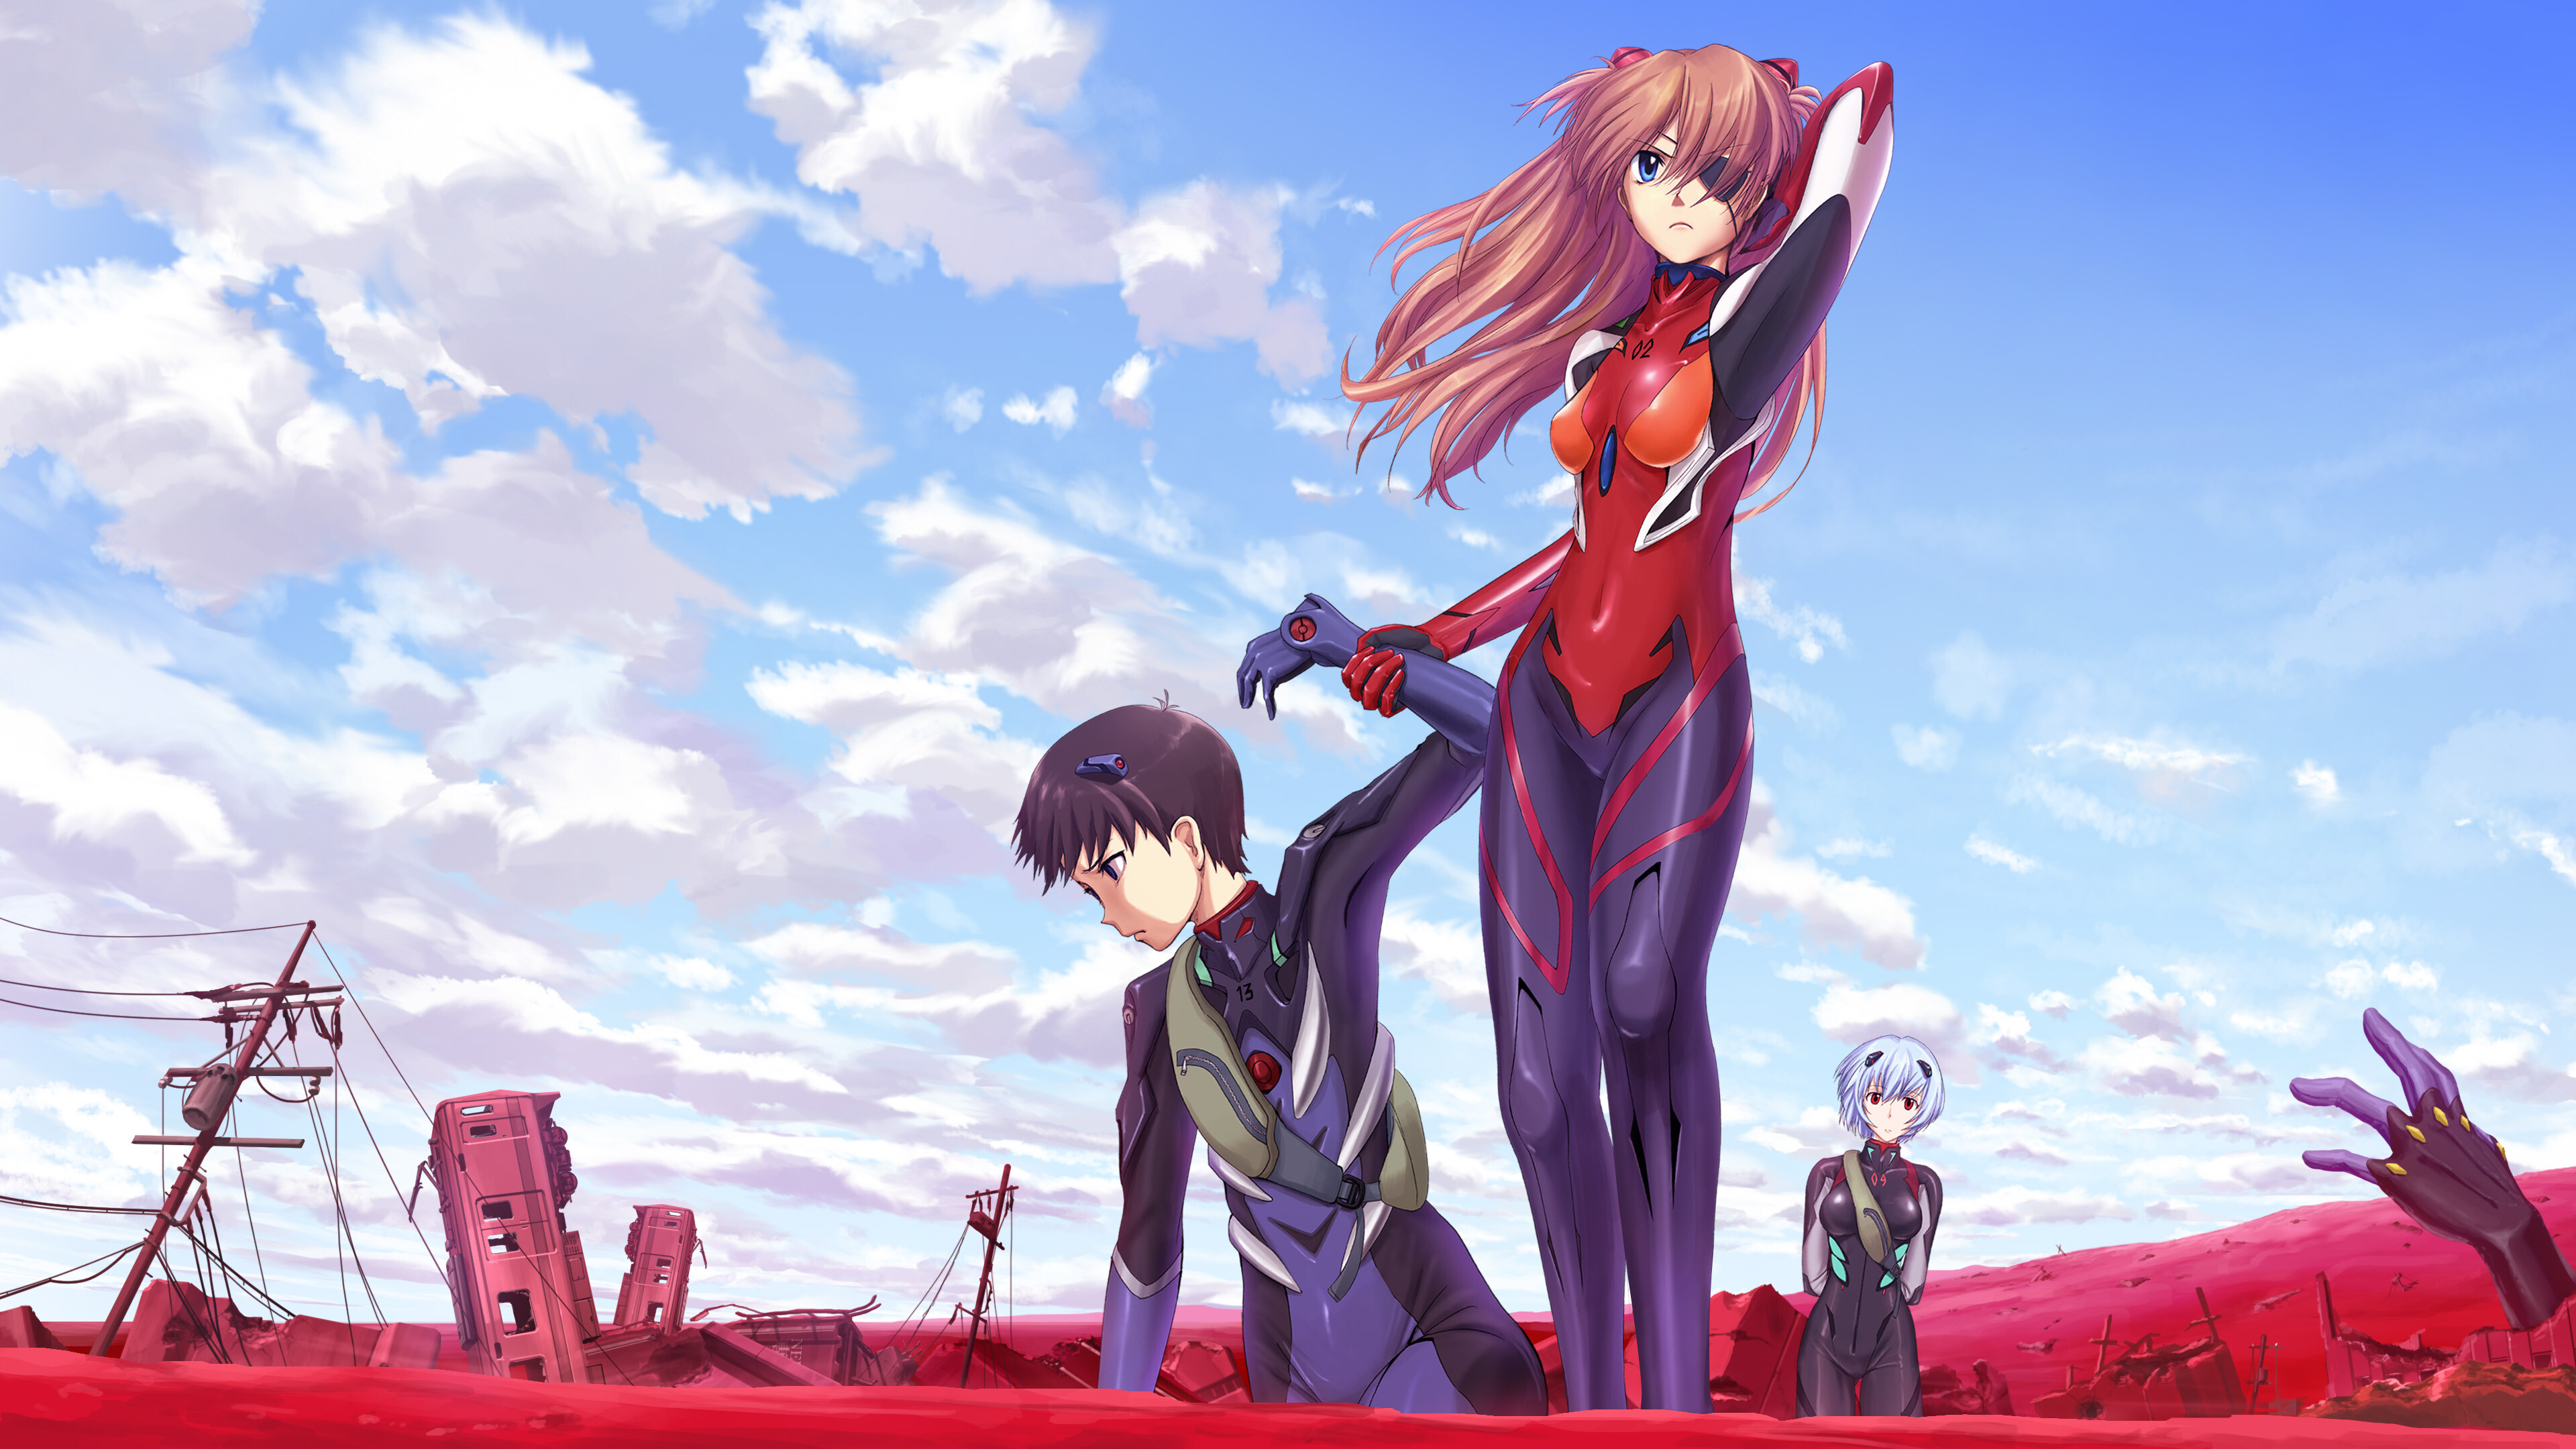 Evangelion: 3.0+1.0 Thrice Upon a Time: The fourth and final installment of the Rebuild of Evangelion, Anime. 3840x2160 4K Wallpaper.